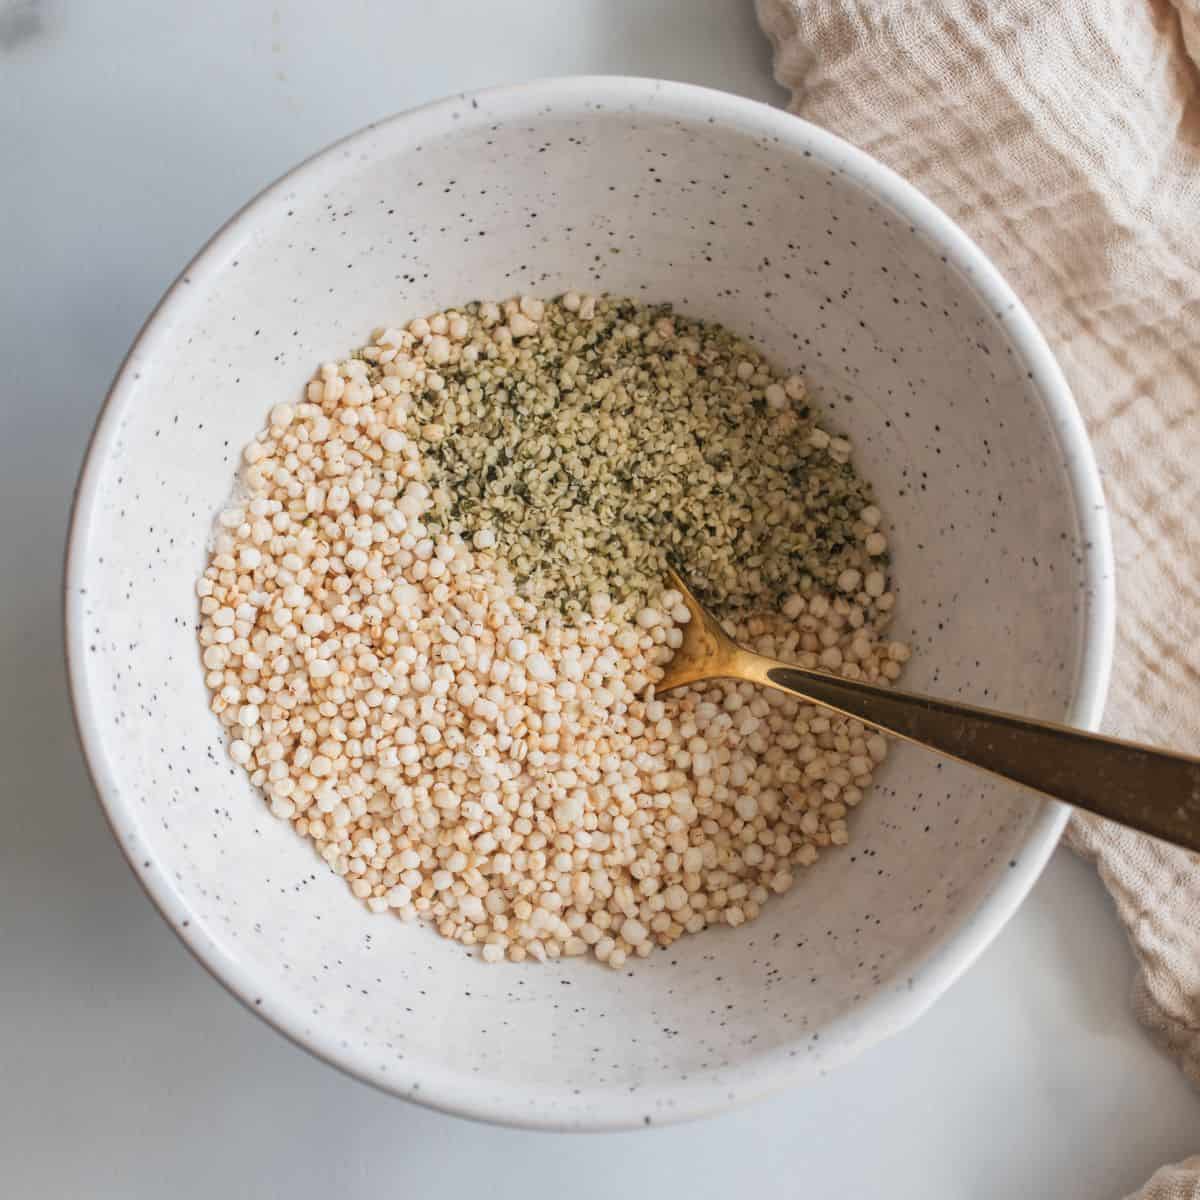 Puffed quinoa, hemp hearts and salt in a ceramic bowl with a spoon inside ready to mix together.